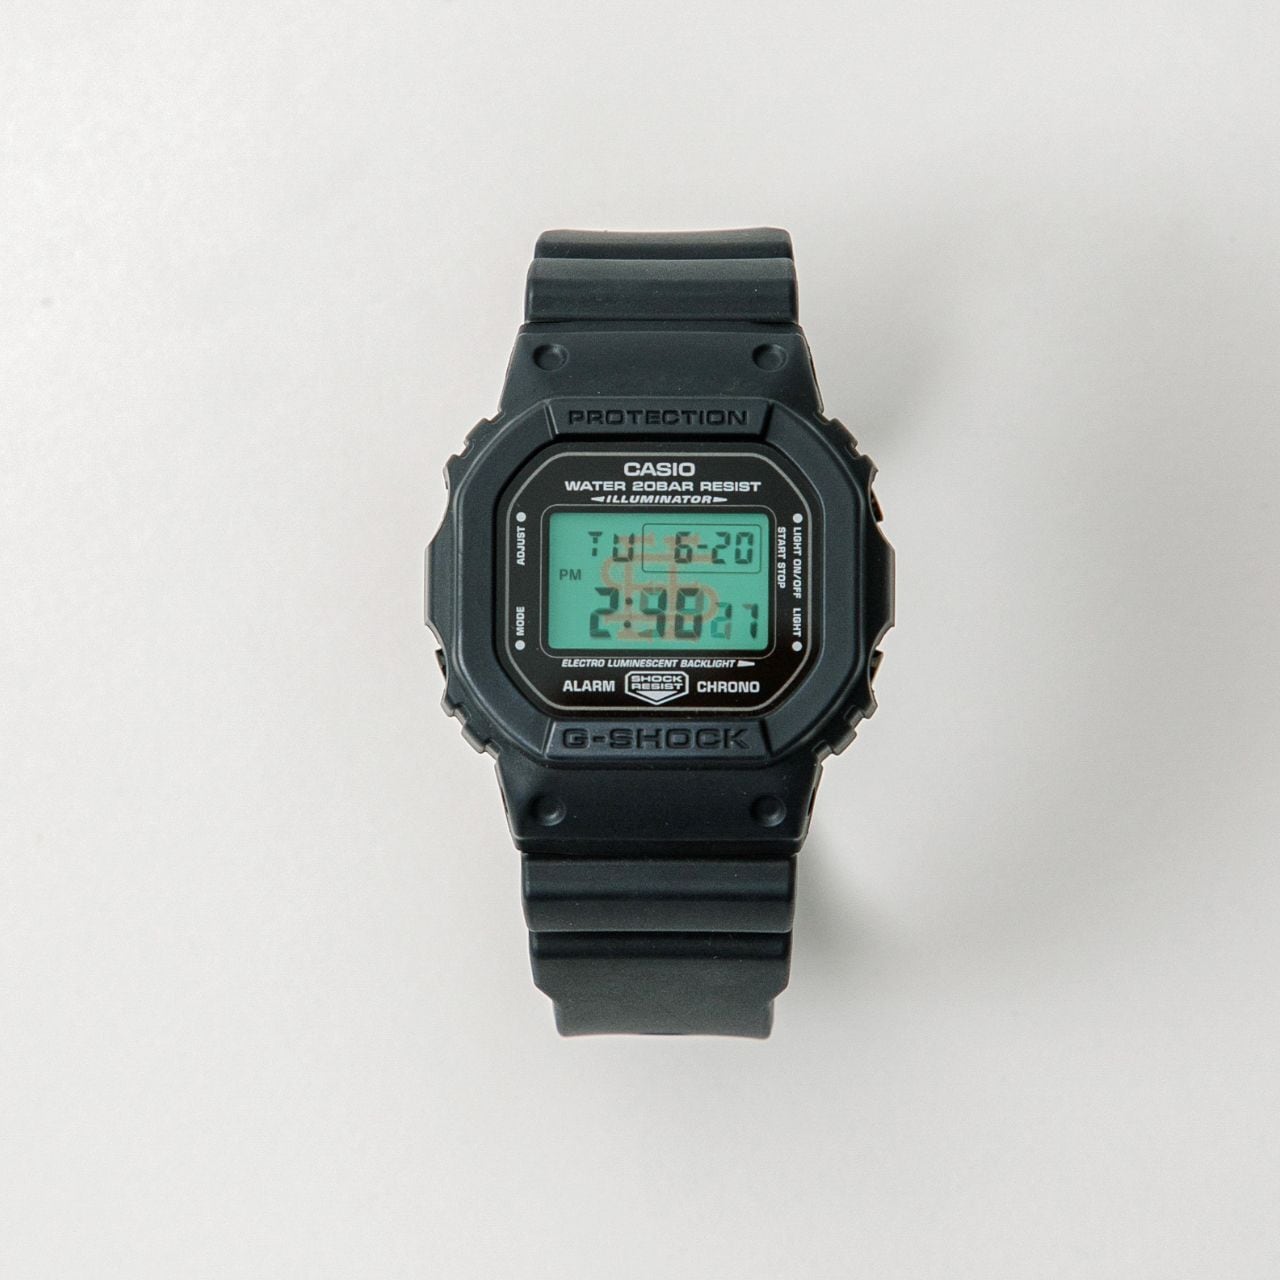 SEE SEE×G-Shock DW5600 Yes Good Market ONLINE